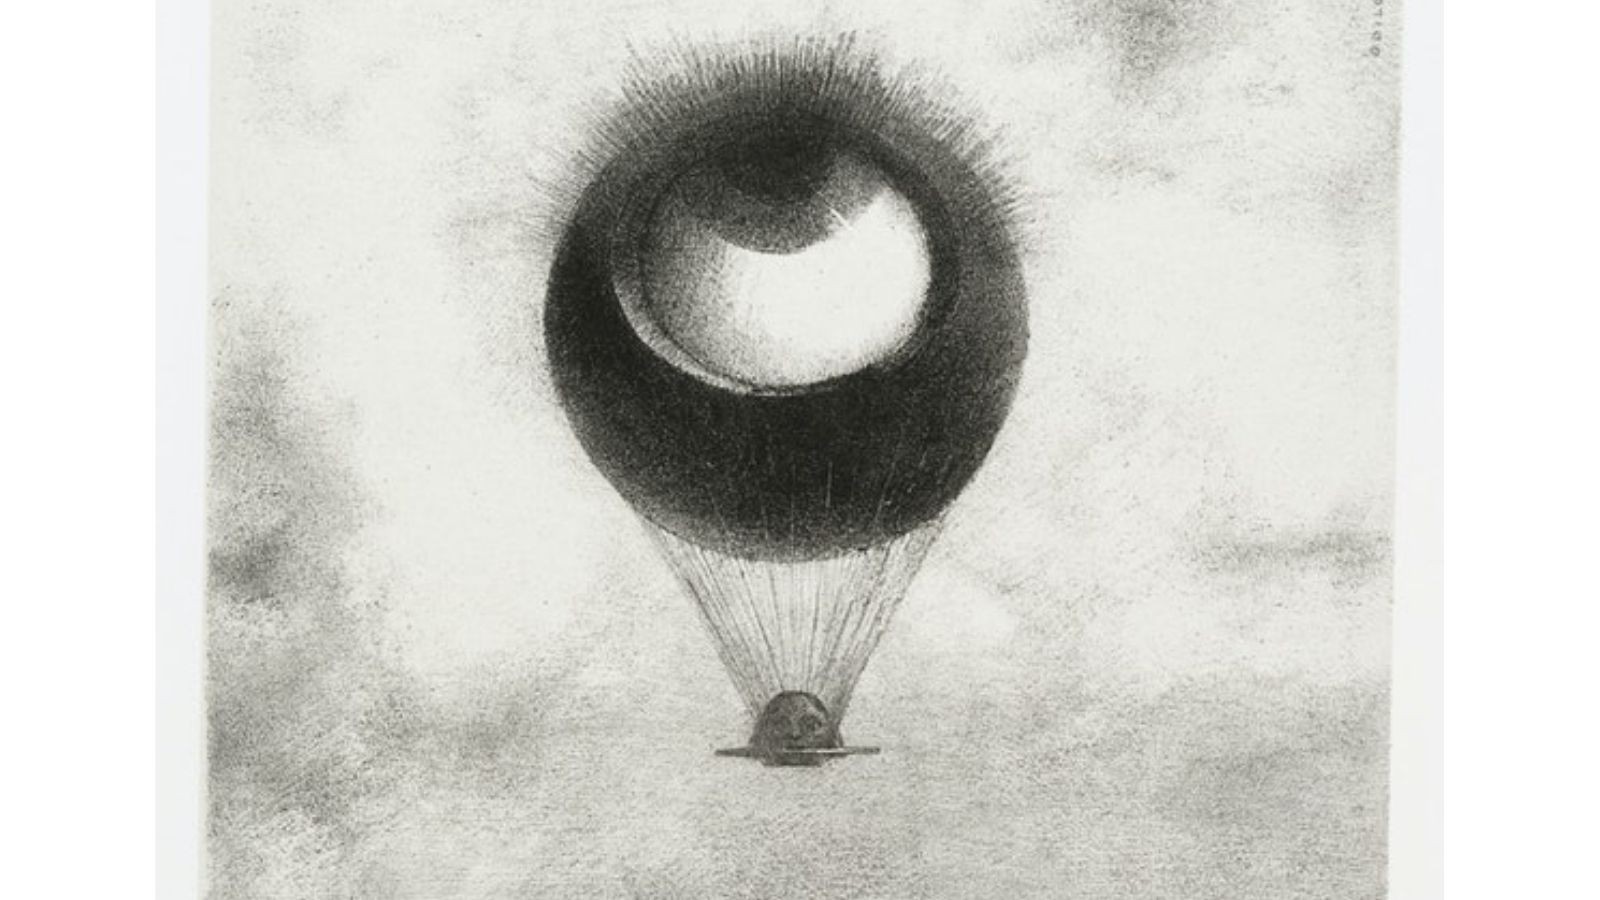 A portion of Odilon Redon's print of an eye hot air balloon, looking upward as it floats into the sky